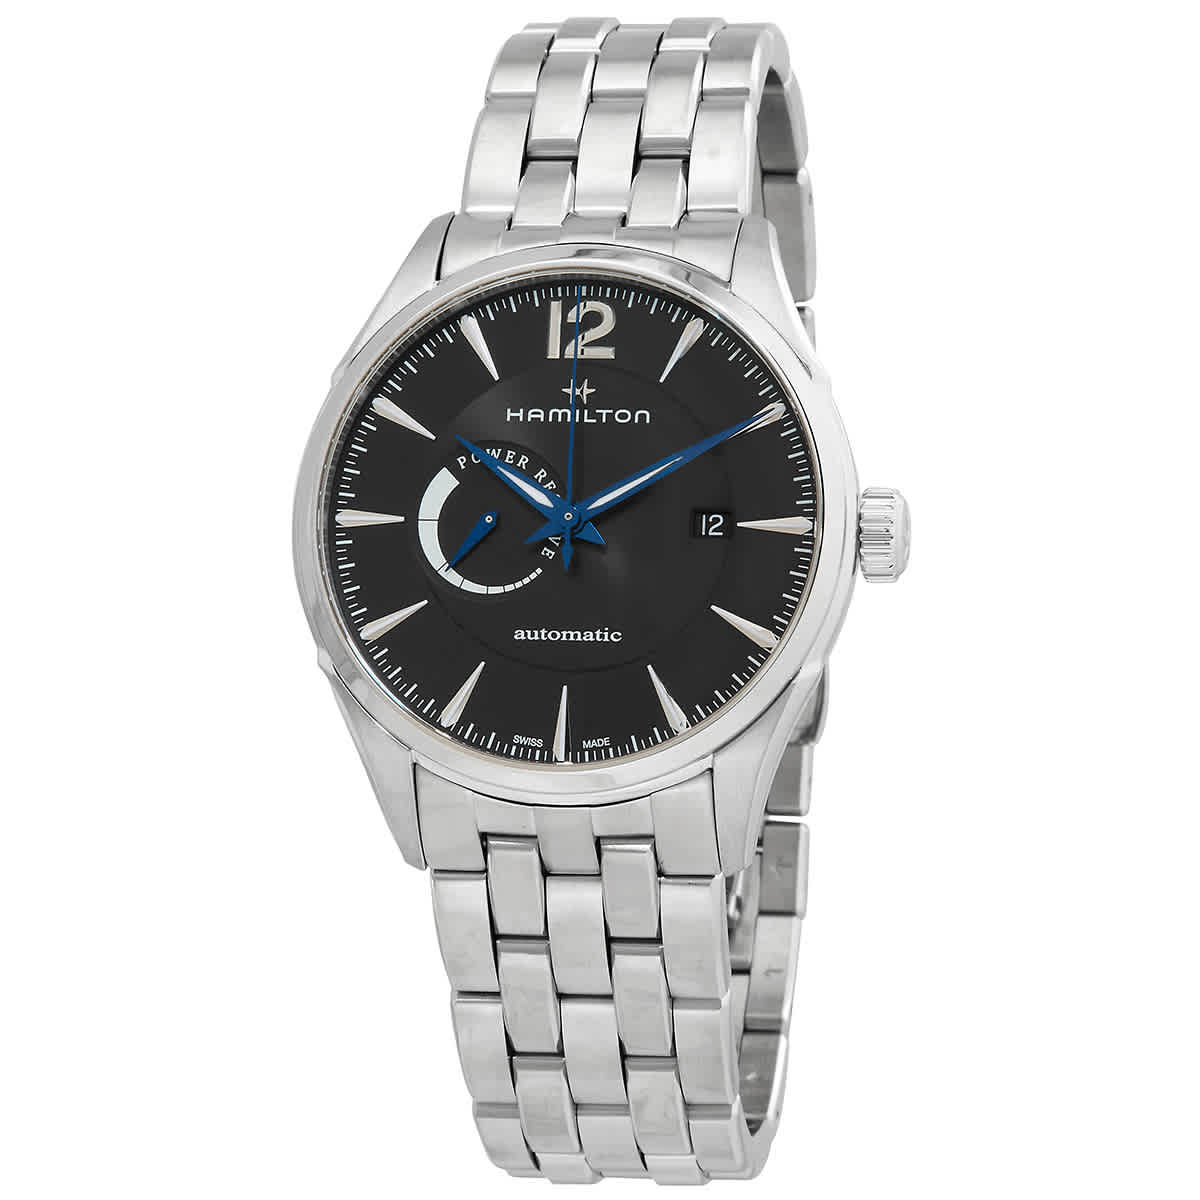 Hamilton Jazzmaster Power Reserve Mens Automatic Watch H89545131 In Black / Blue